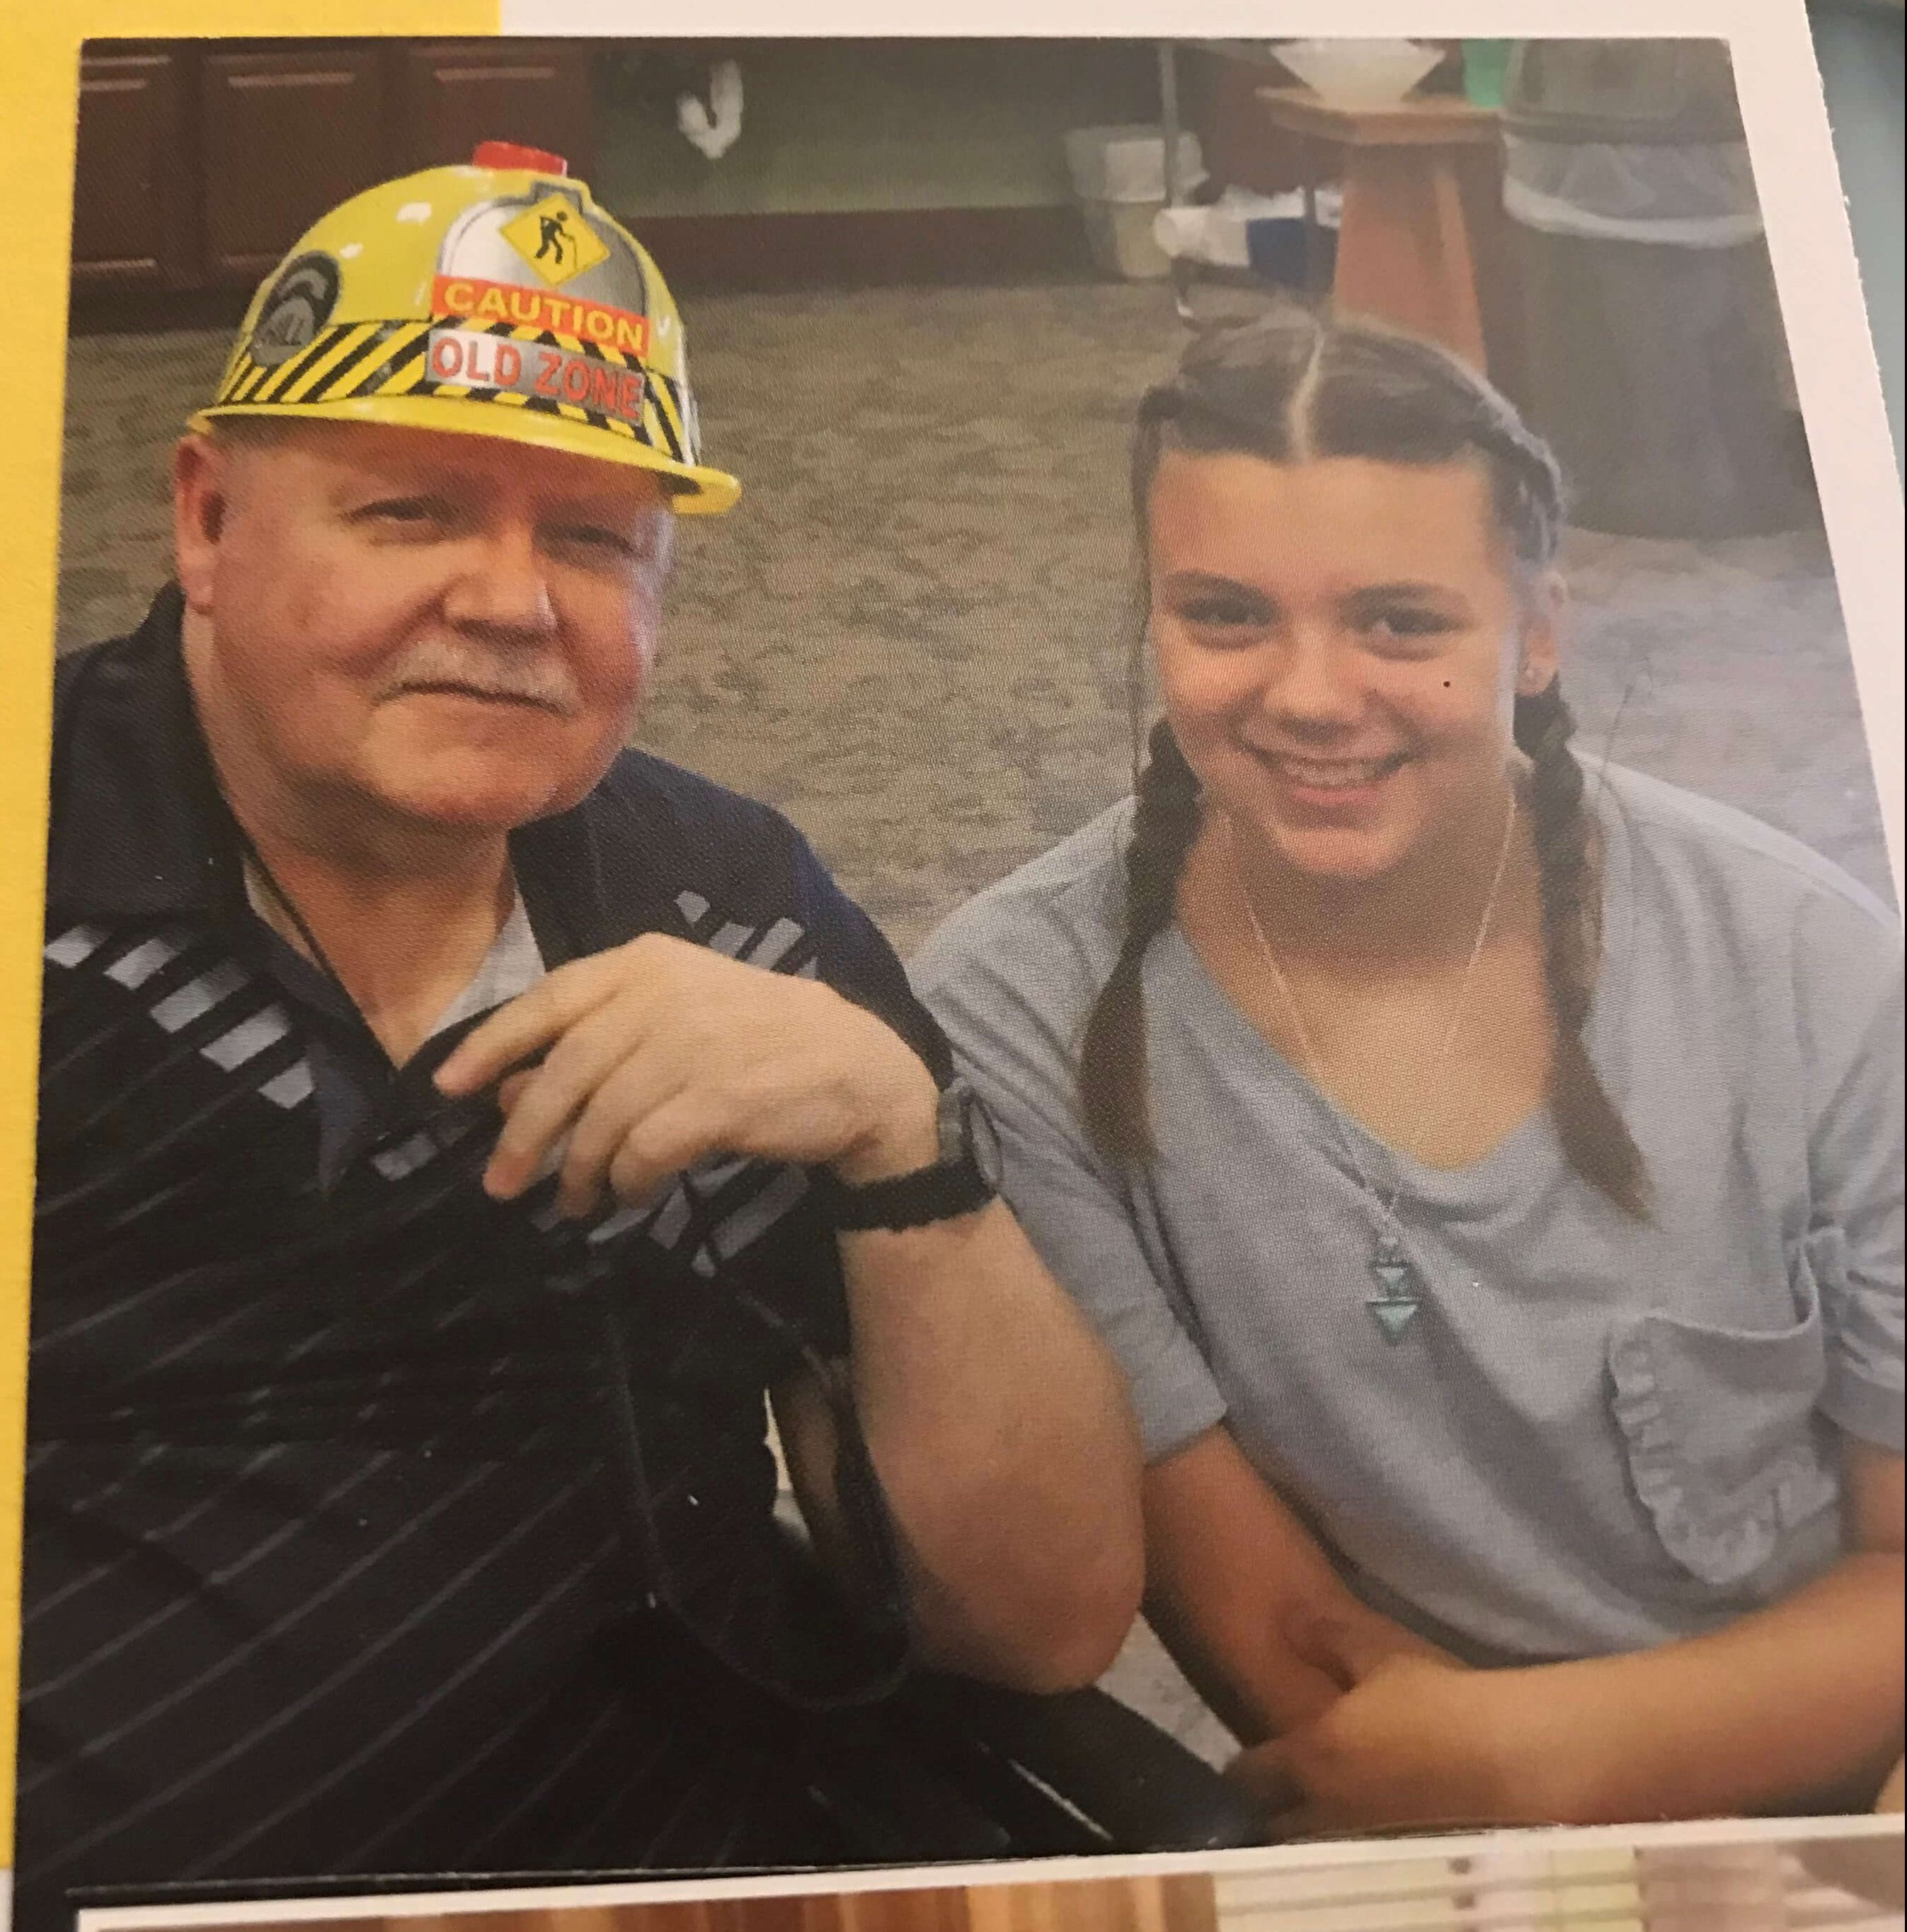 Photo of a scrapbook page that includes an older gentleman in a toy hard hat that says "Caution Old Zone" and a young girl in pigtails.